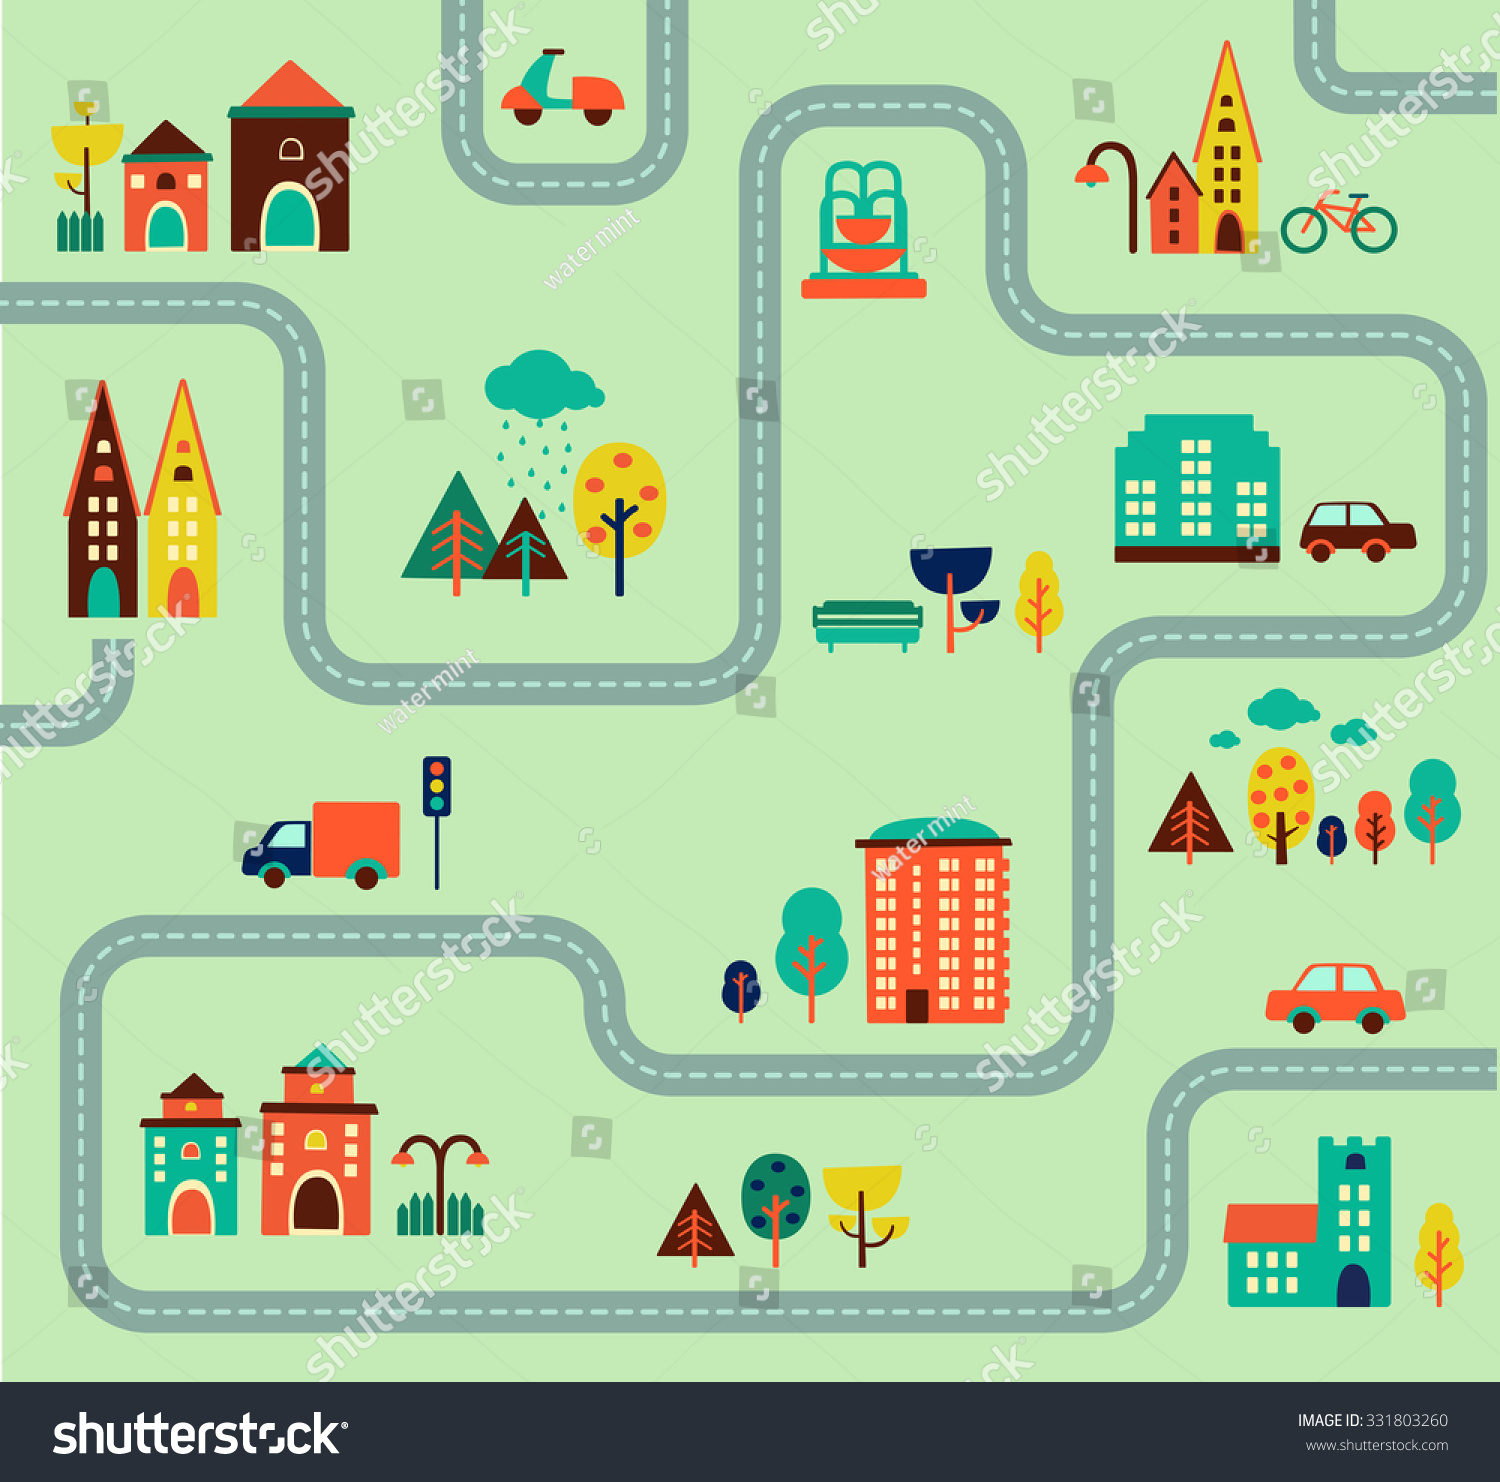 Map City Illustration Elements Infographic Icon Stock Vector 331803260 ...